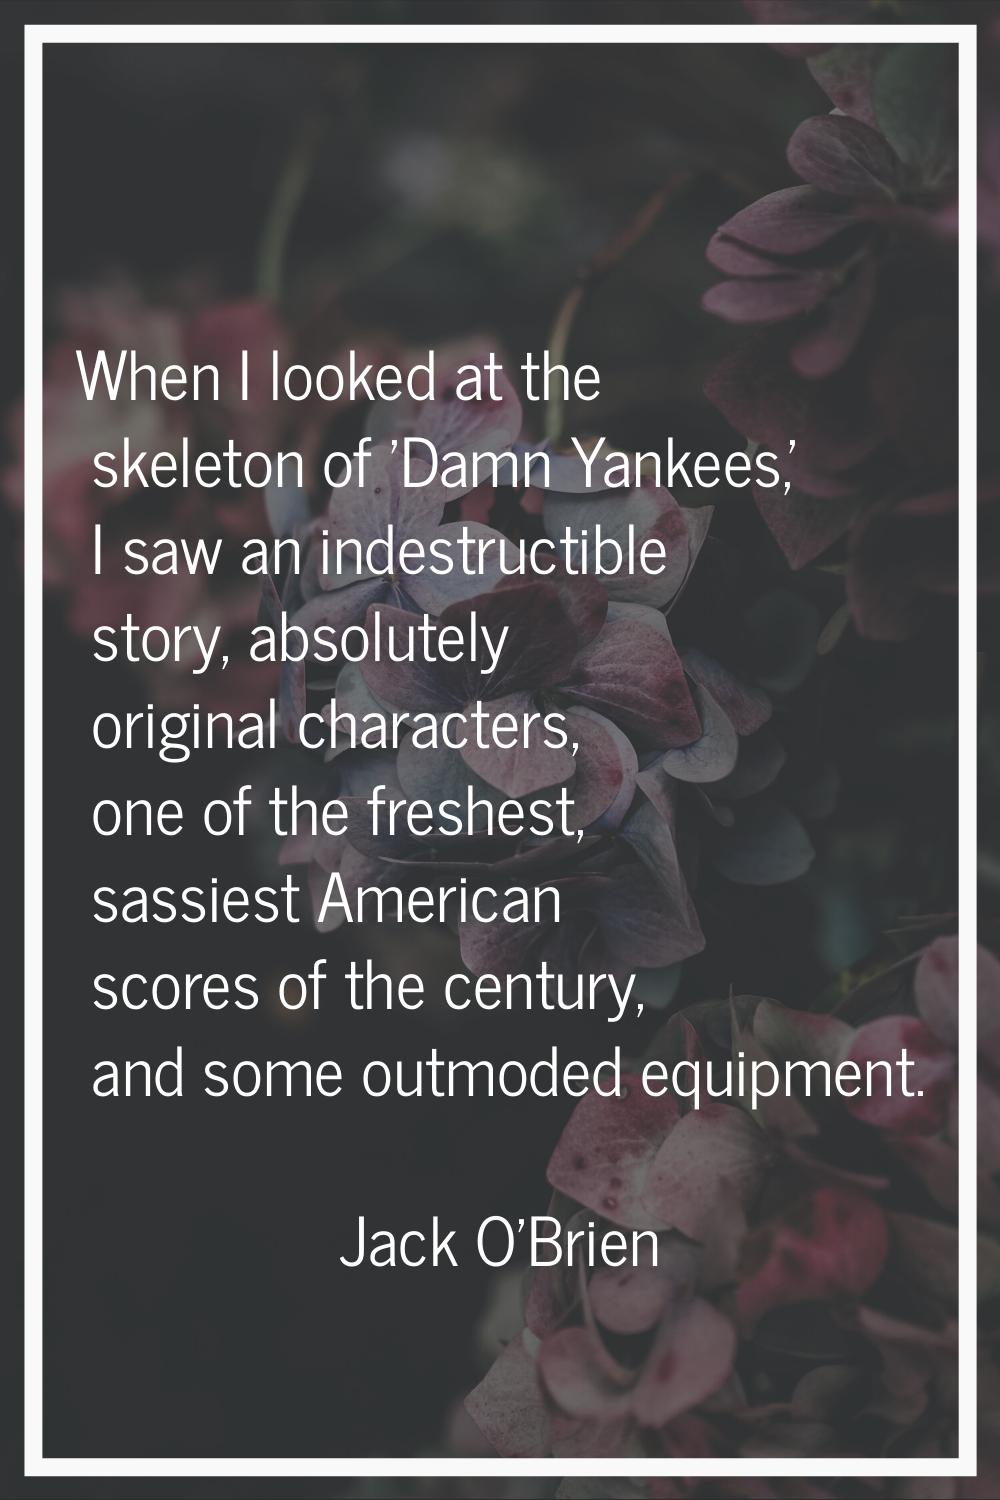 When I looked at the skeleton of 'Damn Yankees,' I saw an indestructible story, absolutely original